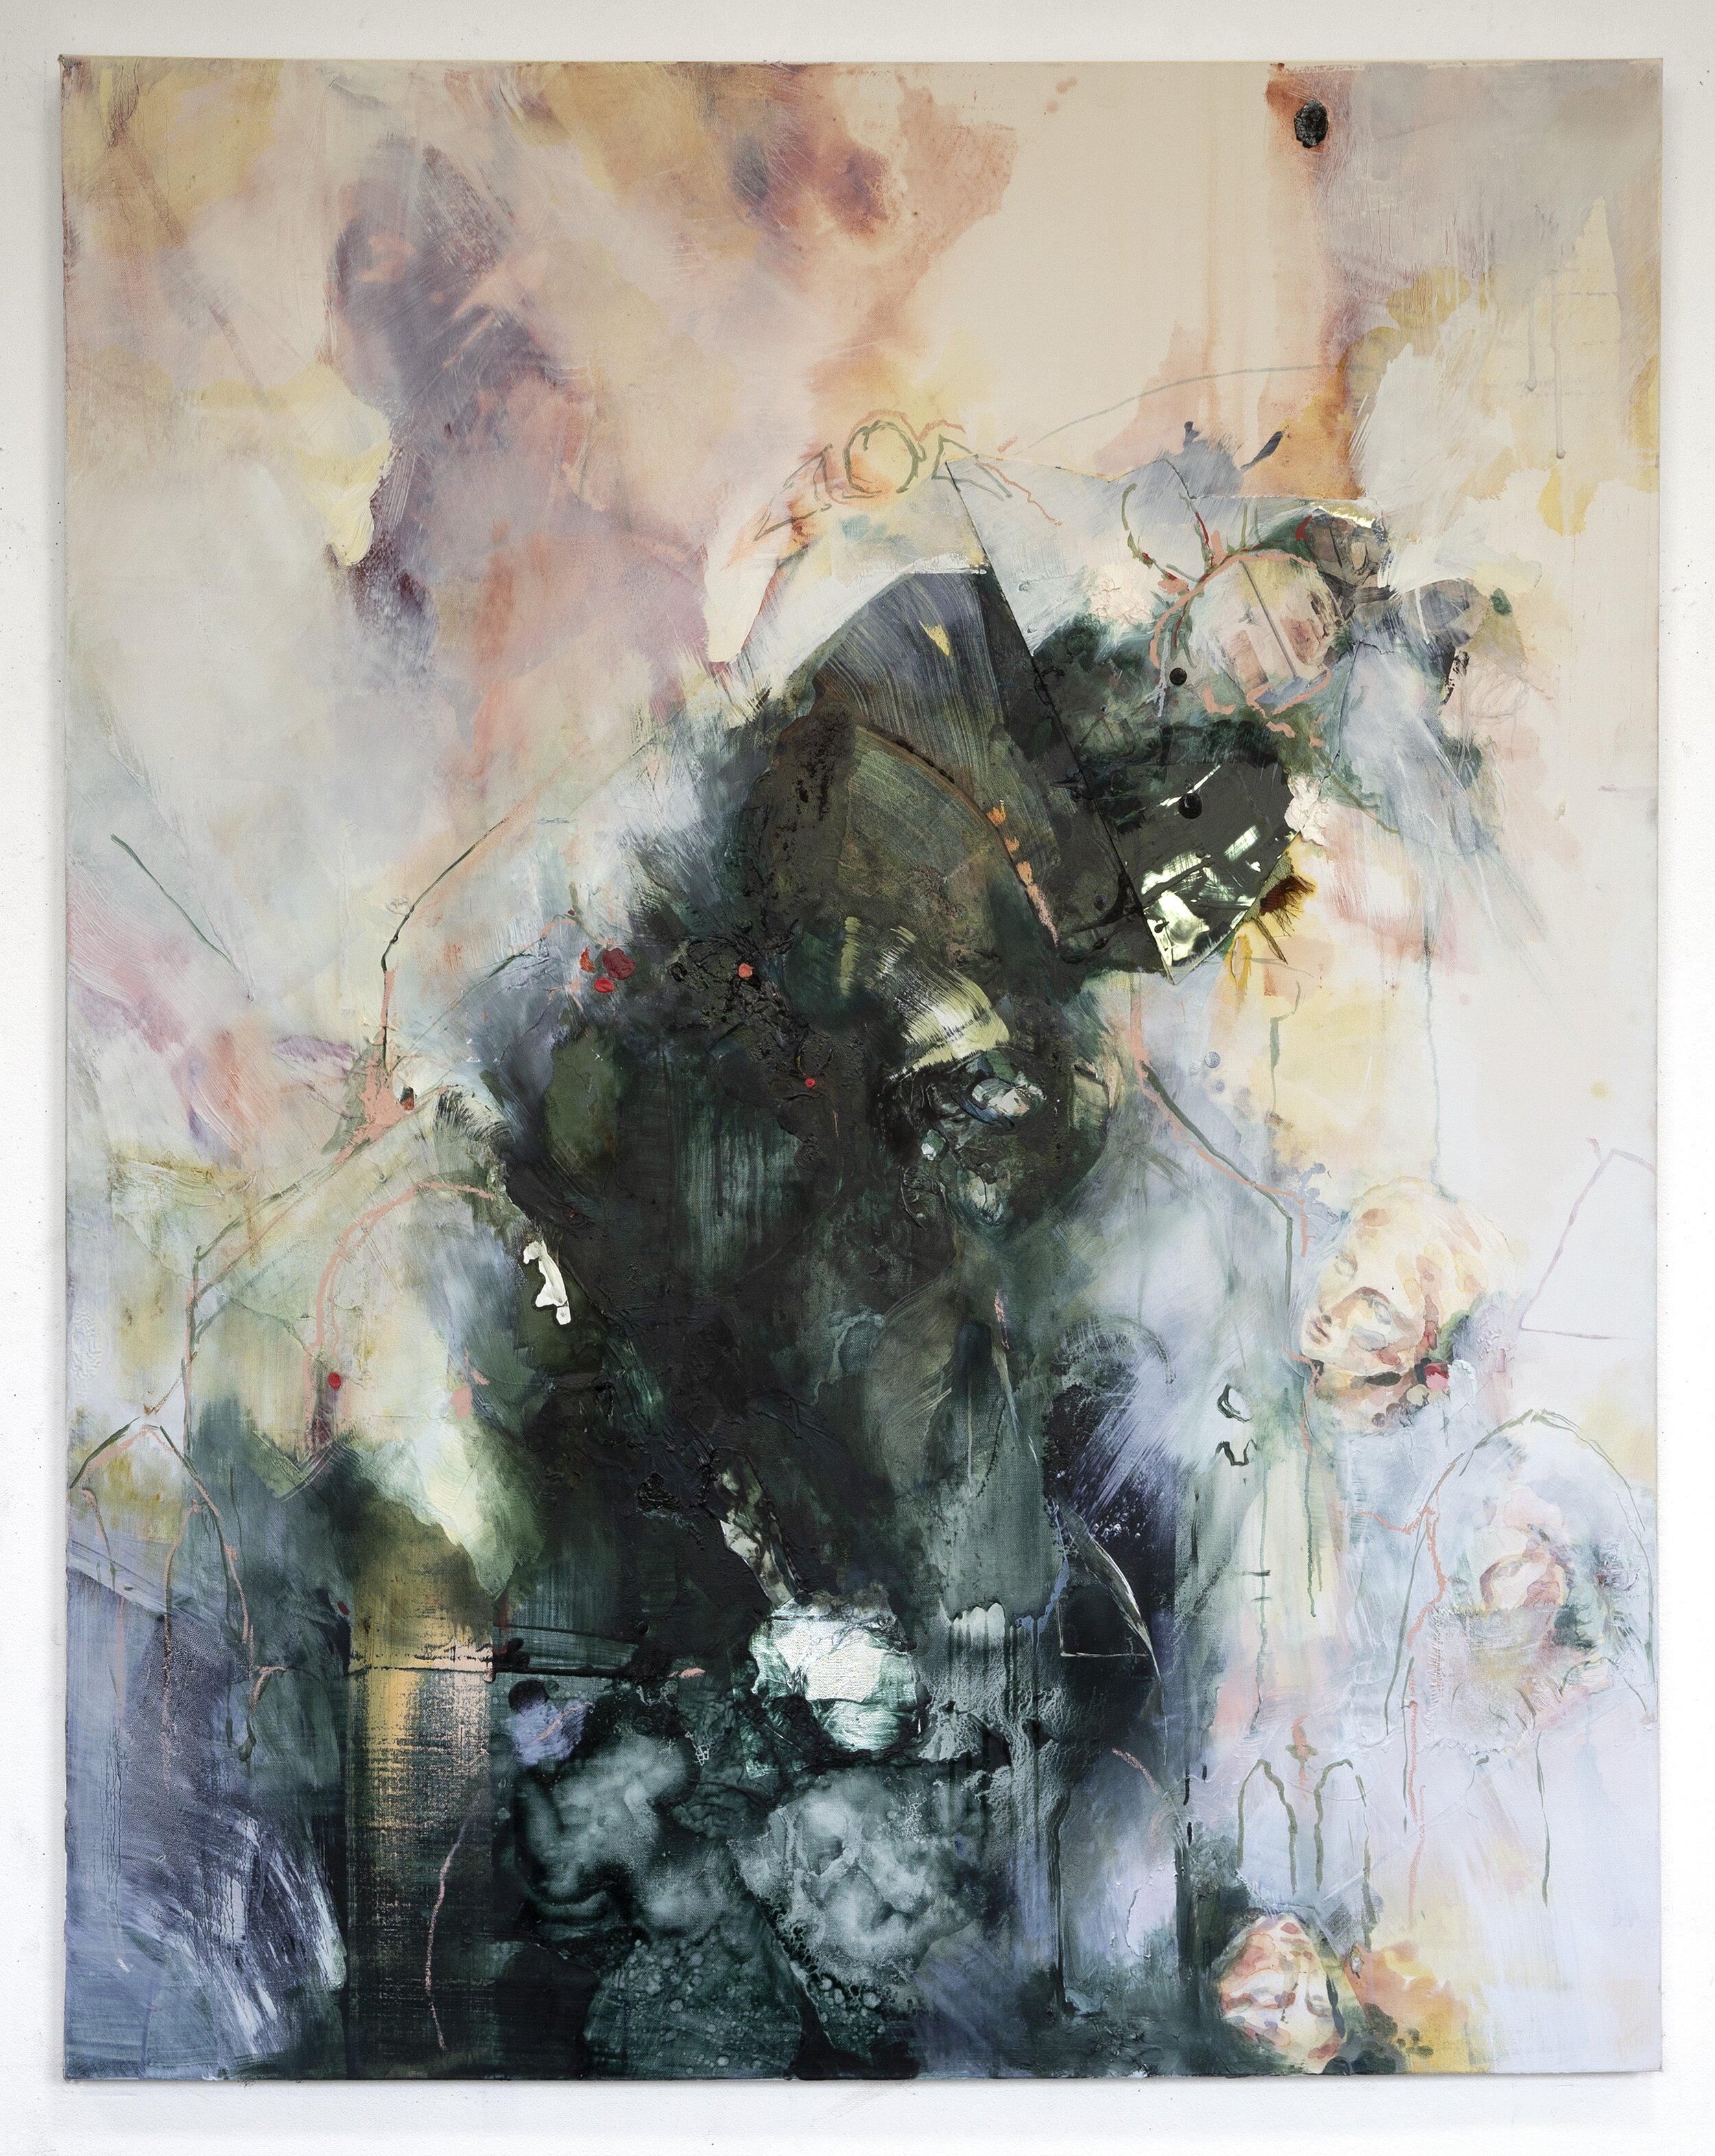   Cathedral of Moss and Fog , Oil and Mixed Media on Canvas,     60” x 48”, 2020 